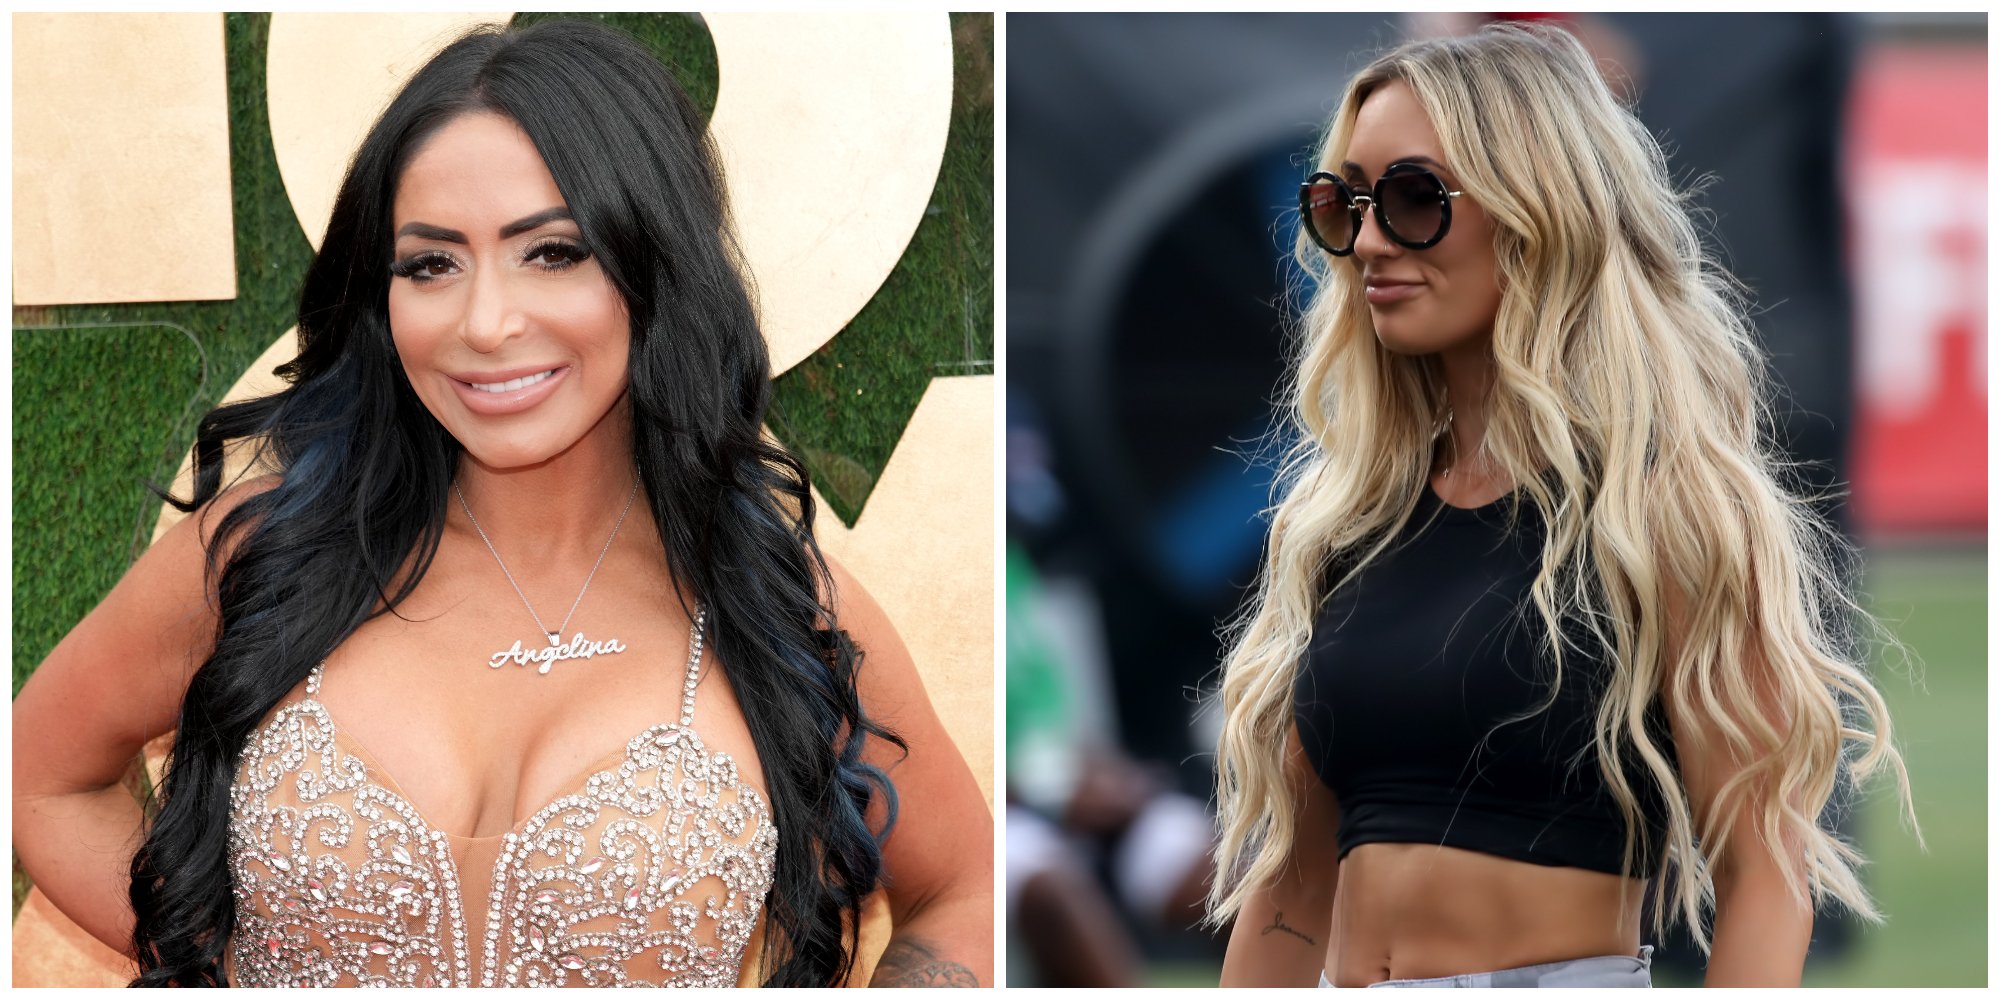 Angelina Pivarnick from 'Jersey Shore: Family Vacation' next to a photo of WWE wrestler Carmella, who she is feuding with on Twitter